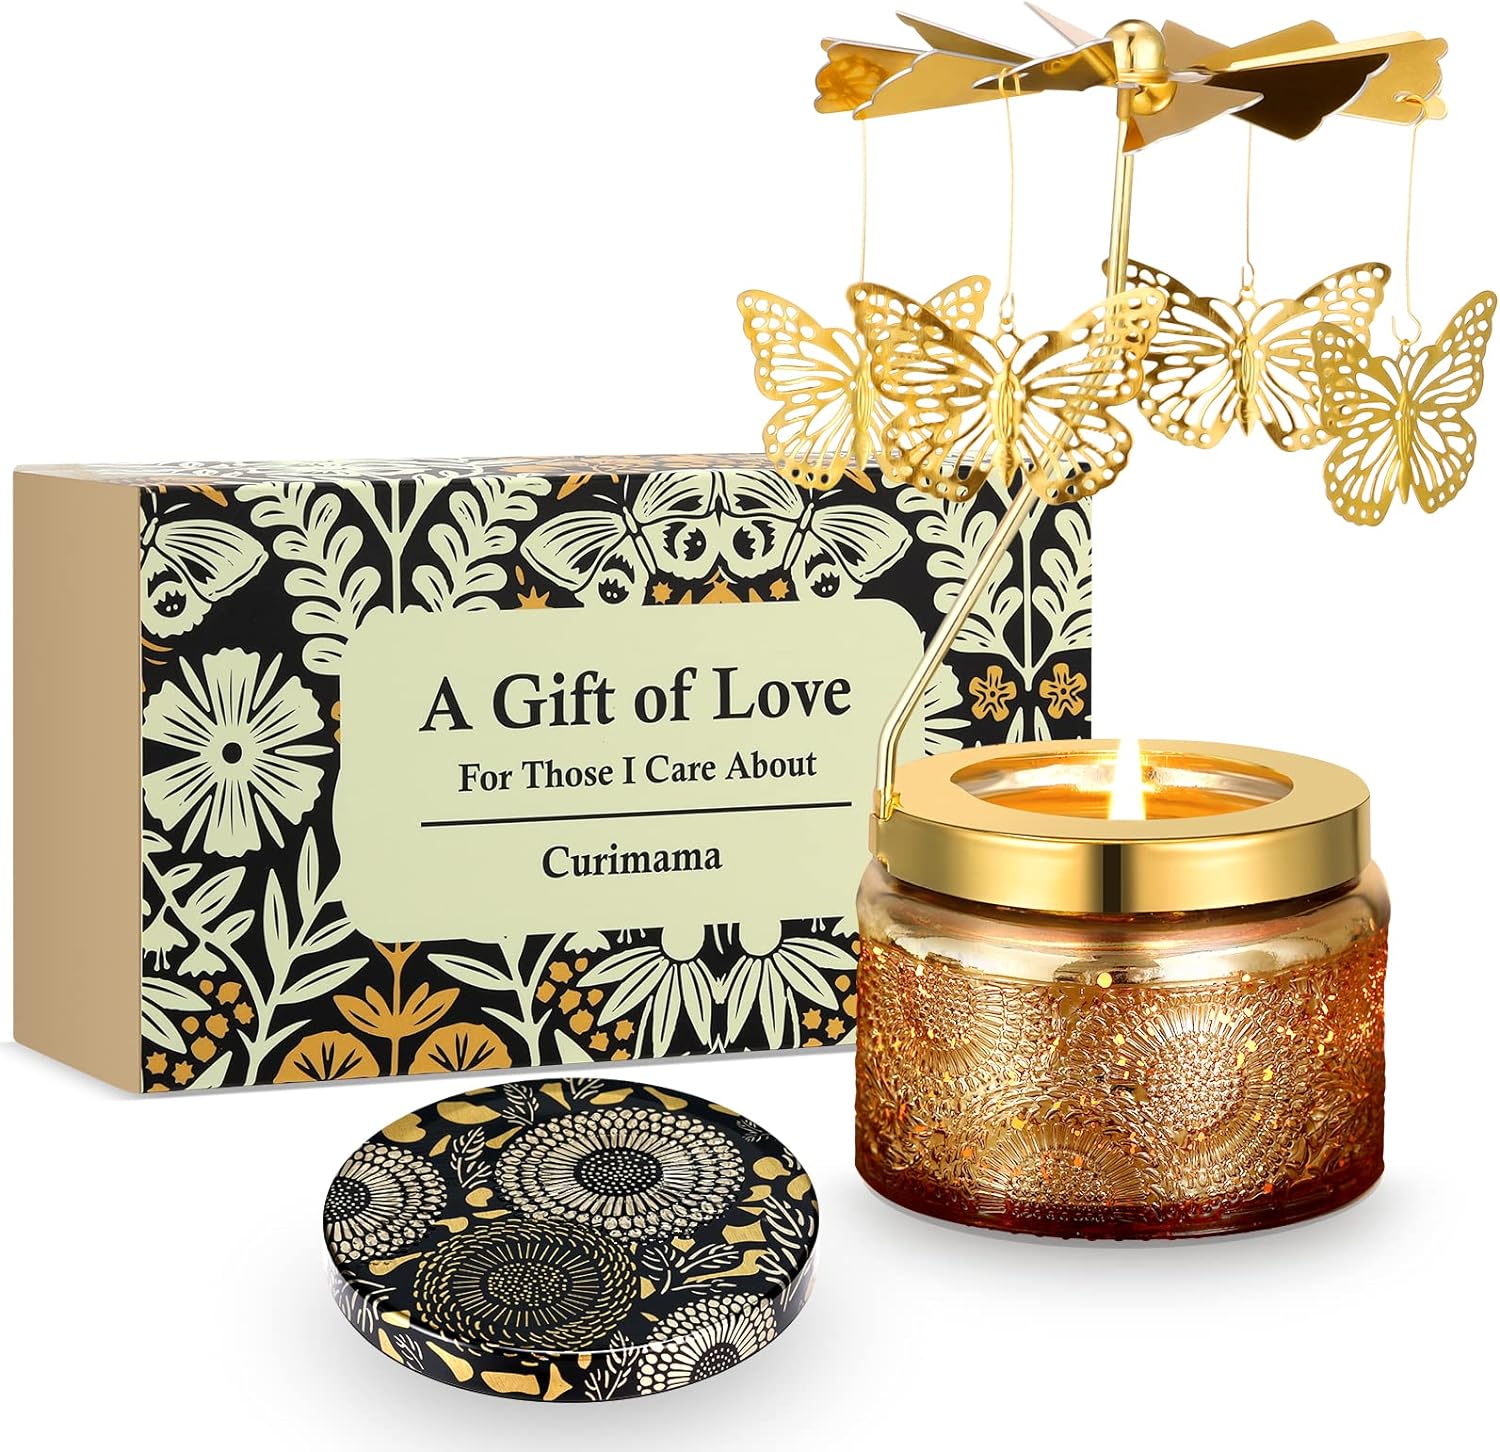 Butterfly Gifts for Women,Unique Birthday Gift for Mom Sister Friendship Girlfriend,Rotatable Scented Candles for Anniversary,Easter, Mother' Day,Gifts for Women Who Have Everything